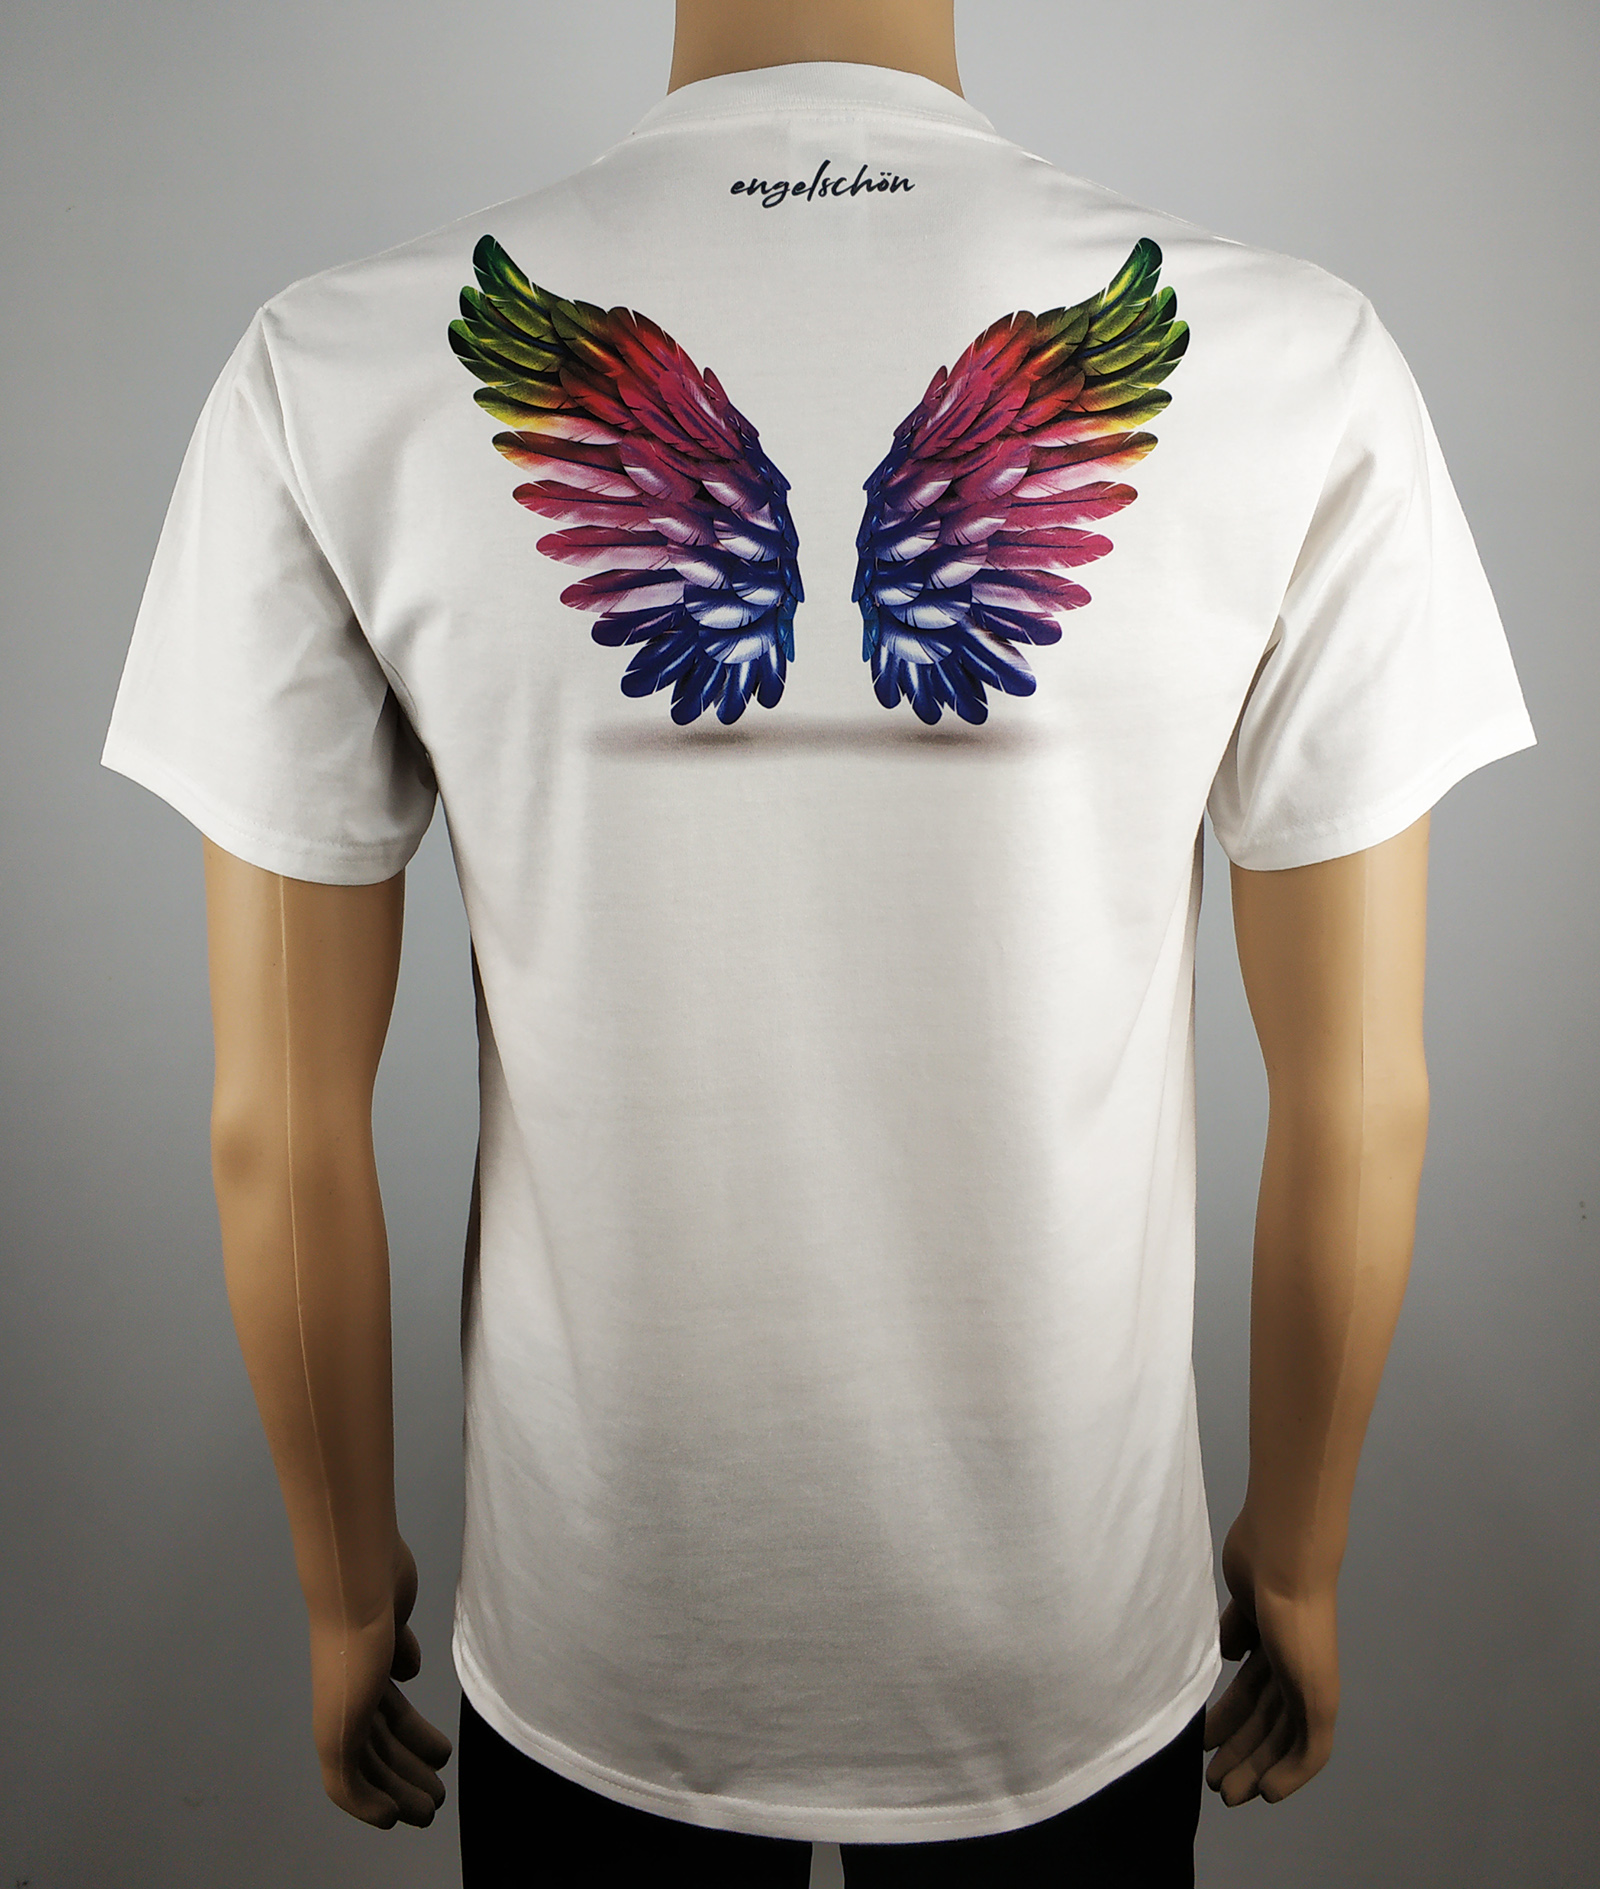 Digital printed white color cotton material t-shirts